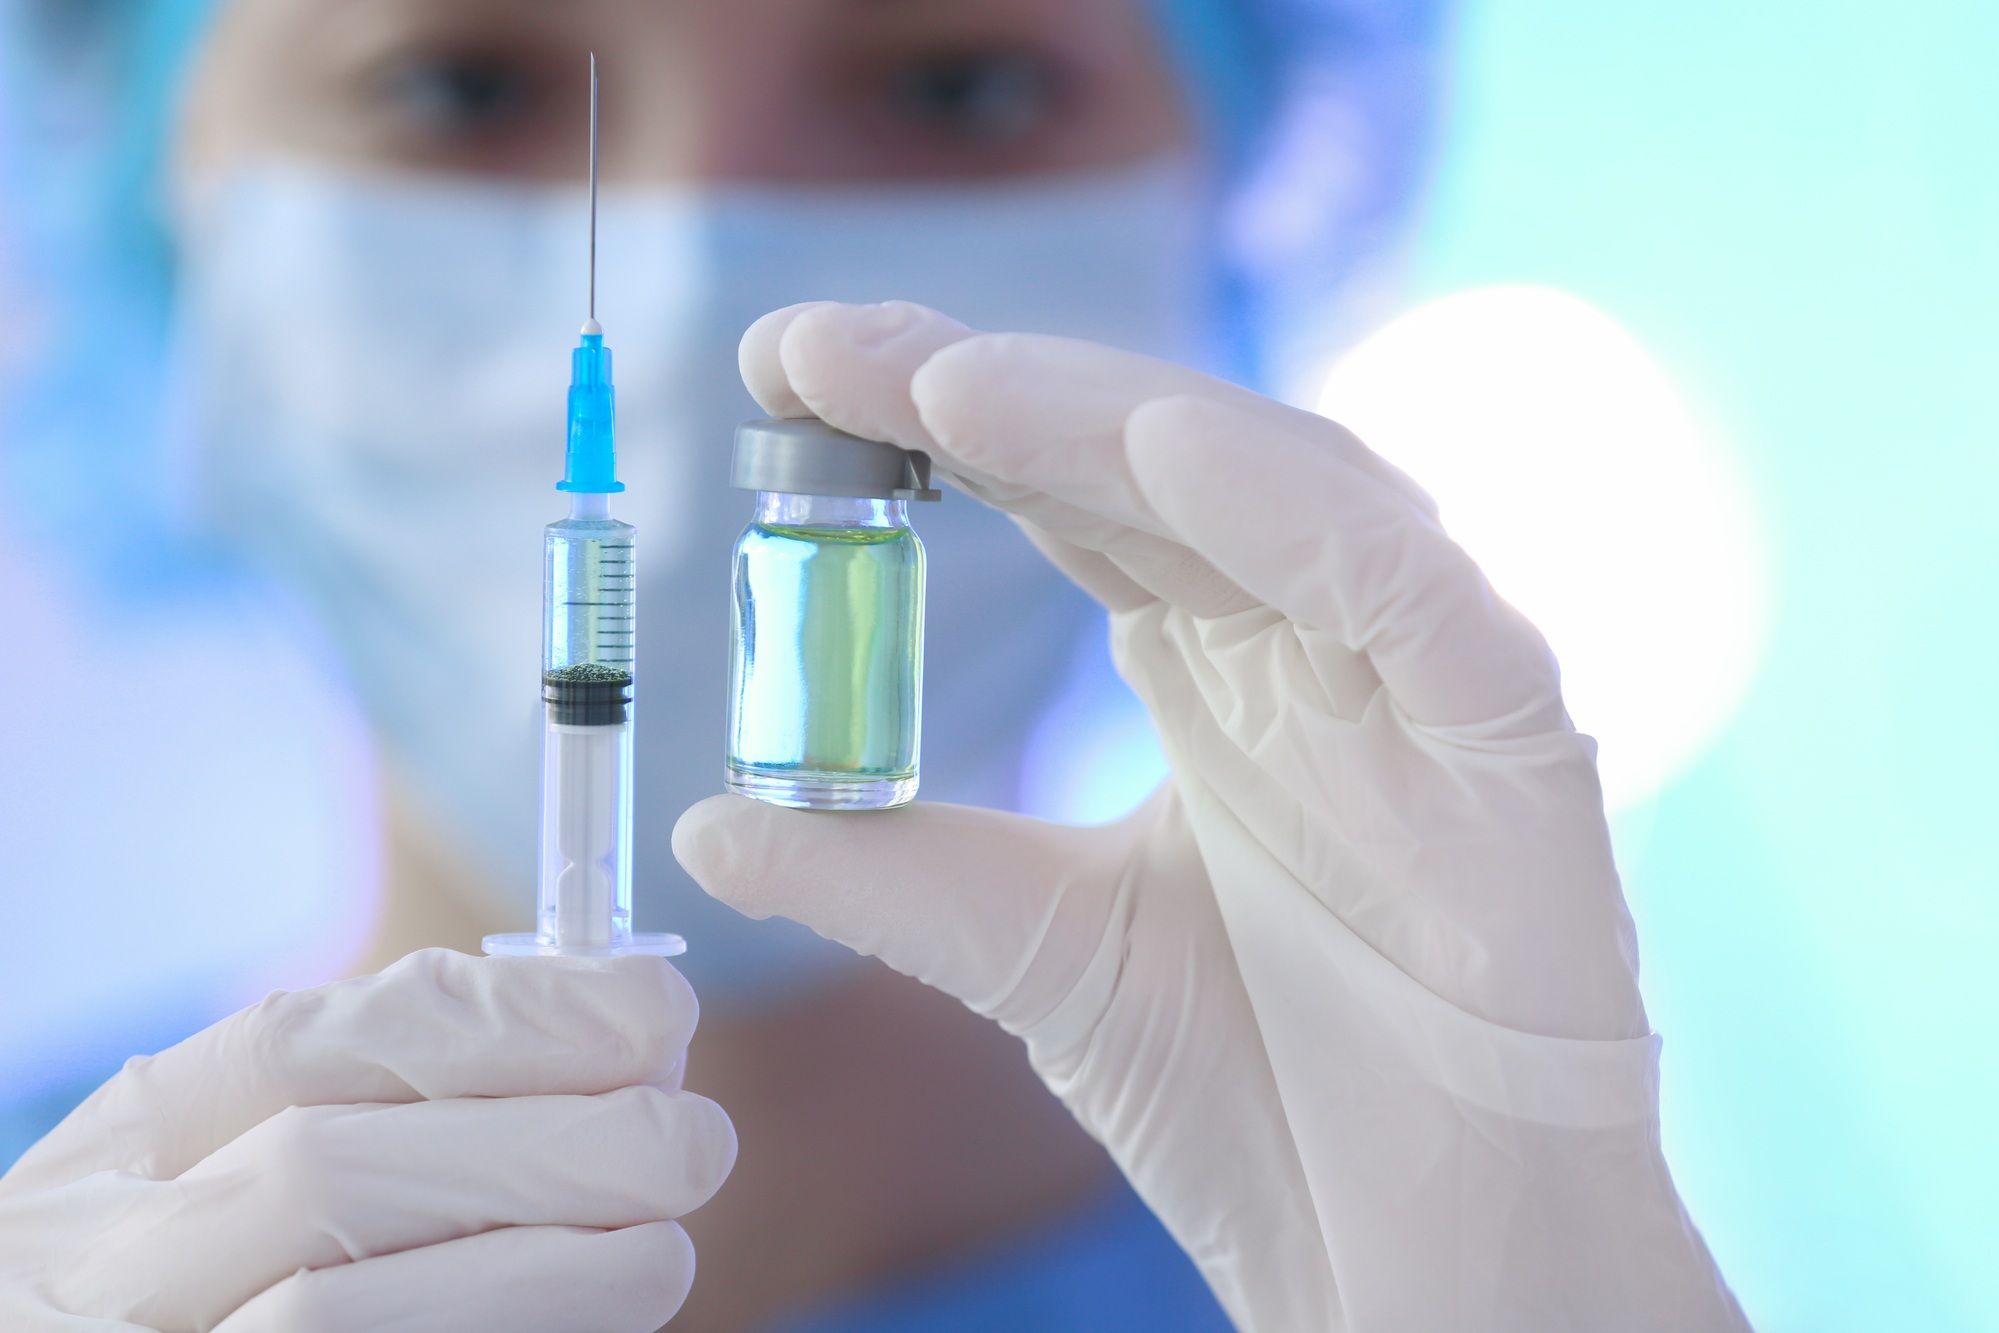 Nurse holding vaccine regarding the COVID-19 vaccine approved in UK